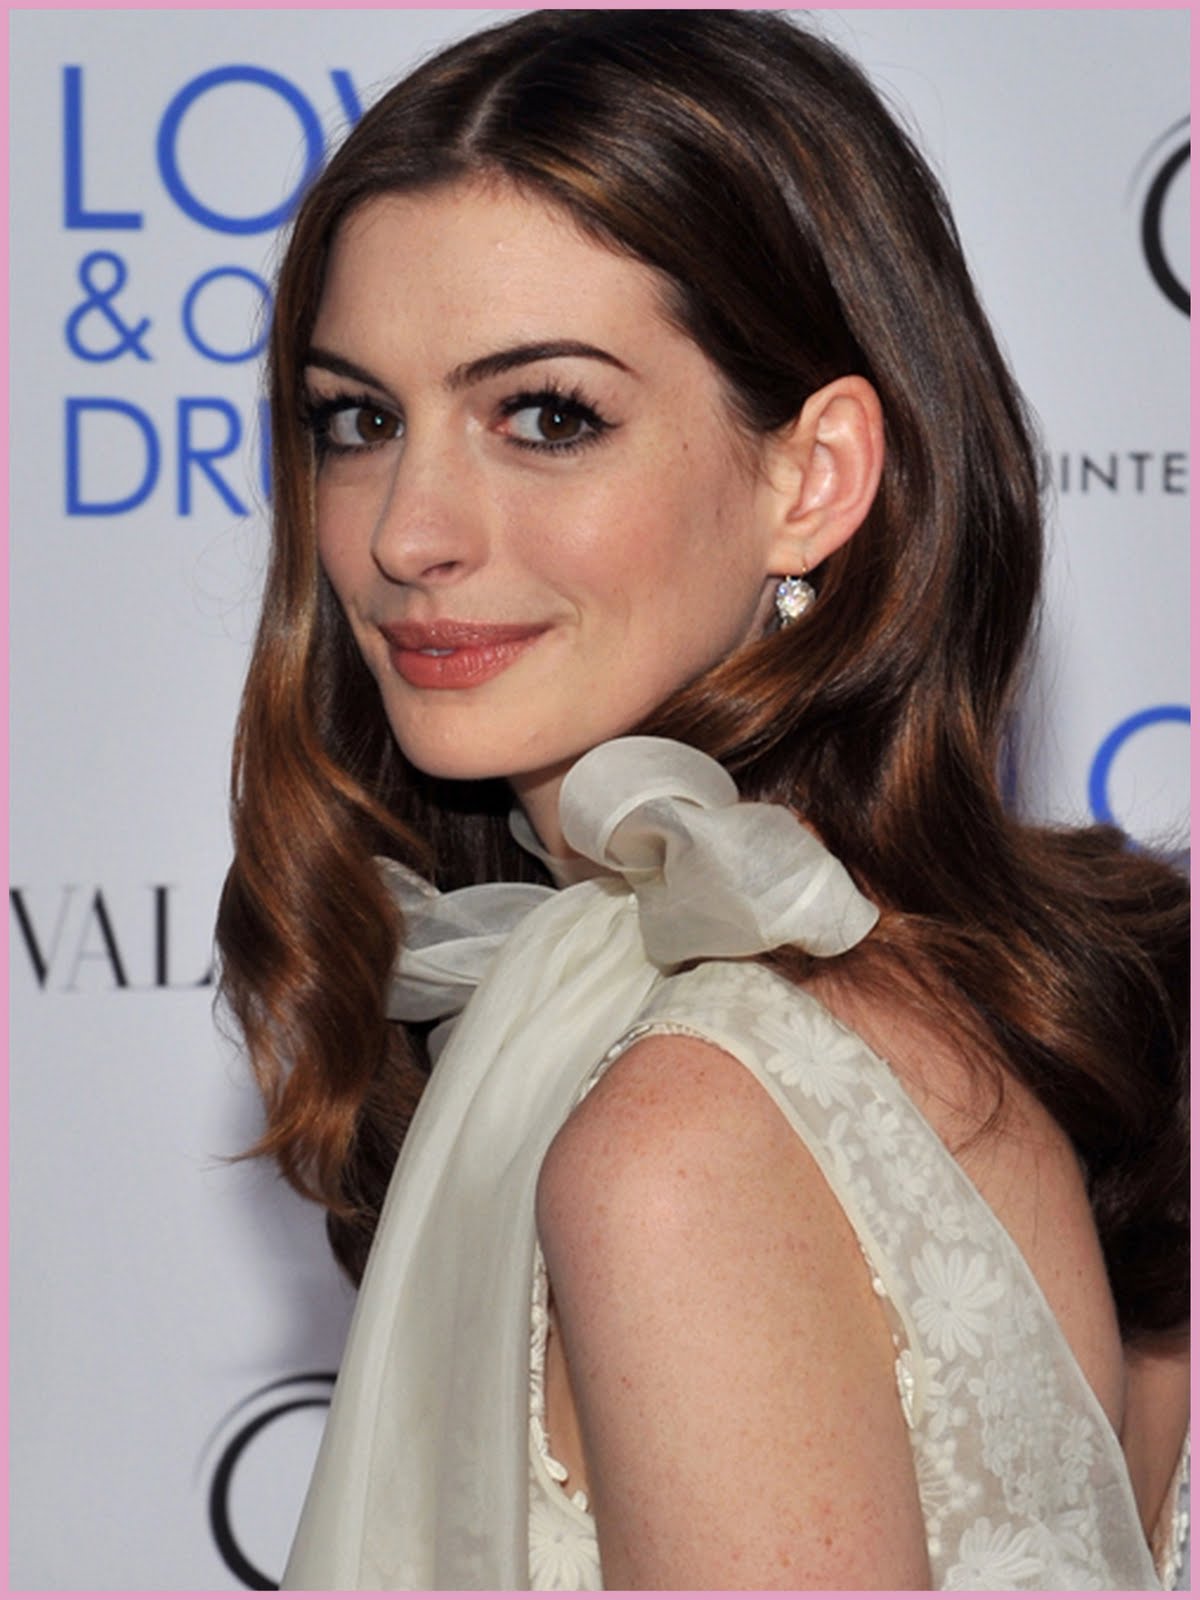 Anne Hathaway's Chanel Makeup Look at the One Day Premiere - Racked